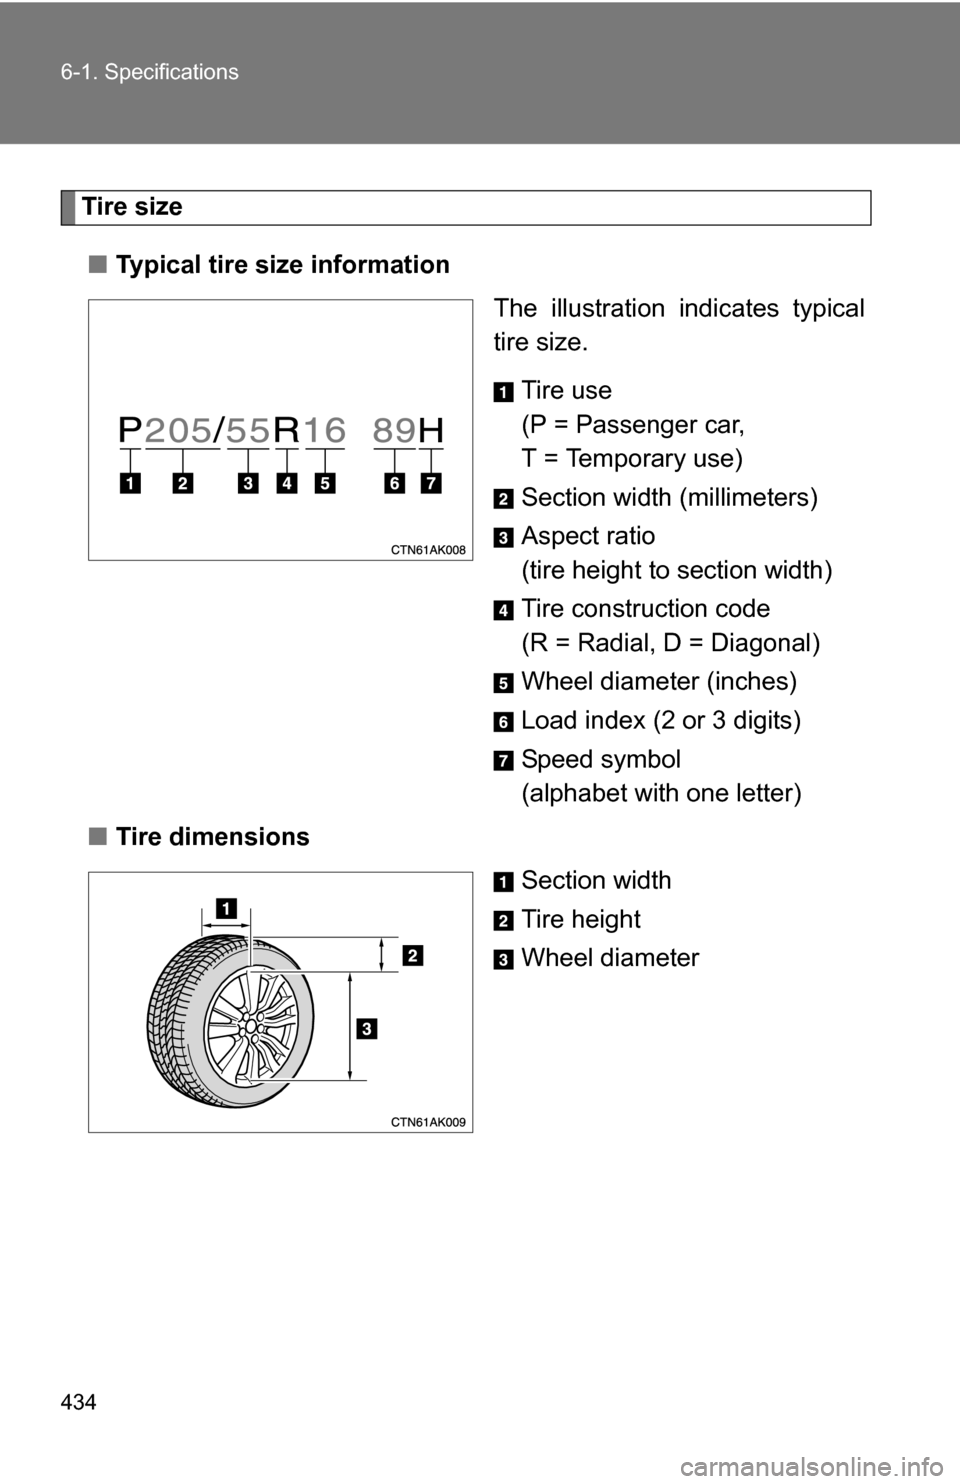 TOYOTA COROLLA 2009 10.G Owners Manual 434 6-1. Specifications
Tire size■ Typical tire size information
The illustration indicates typical
tire size.
Tire use
(P = Passenger car, 
T = Temporary use)
Section width (millimeters)
Aspect rat